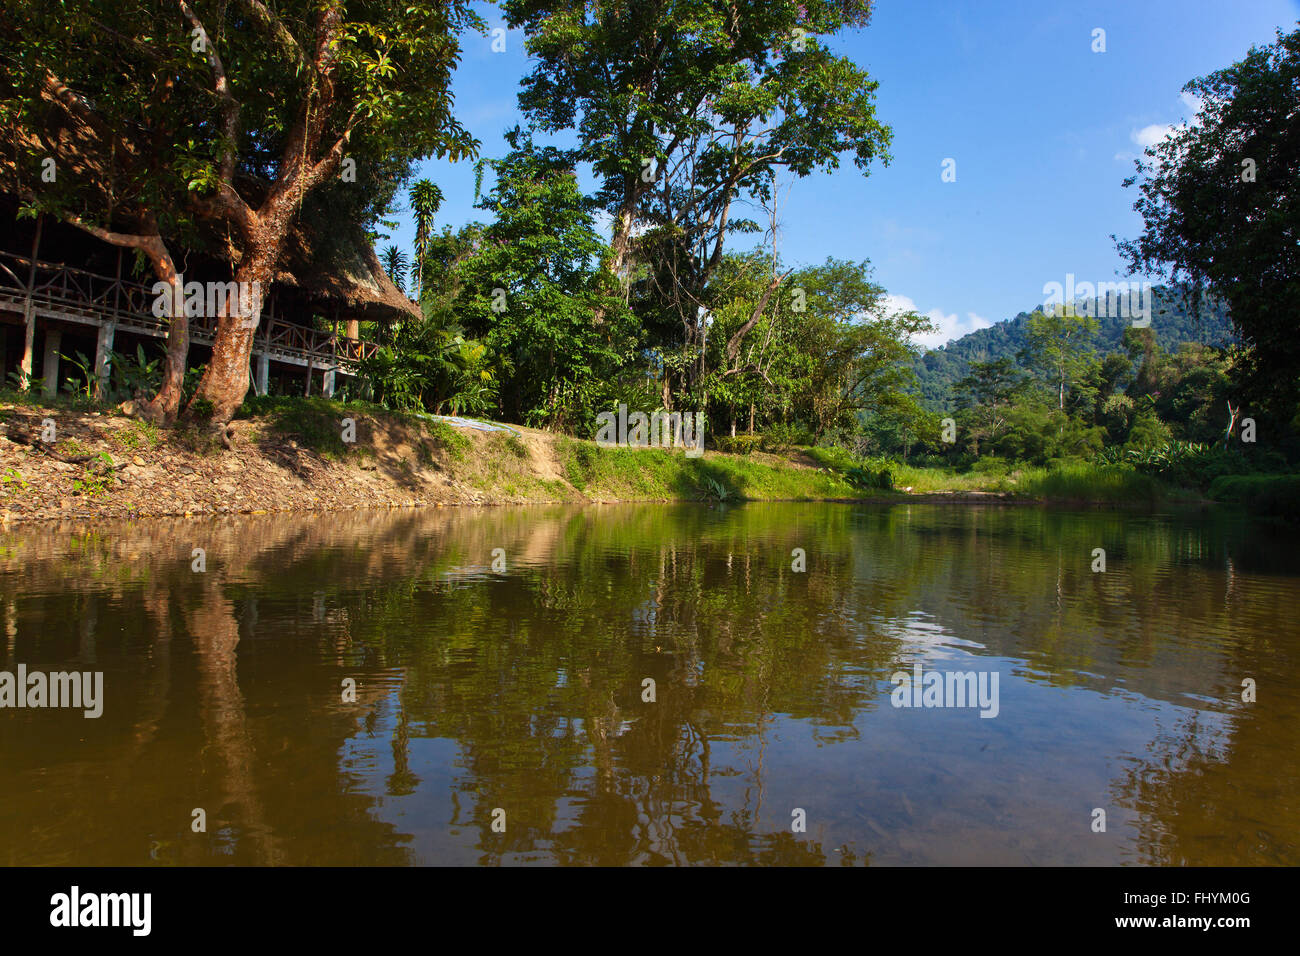 The RIVERSIDE COTTAGES in KHO SOK, a perfect place to stay to visit Kho Sok National Park - THAILAND Stock Photo